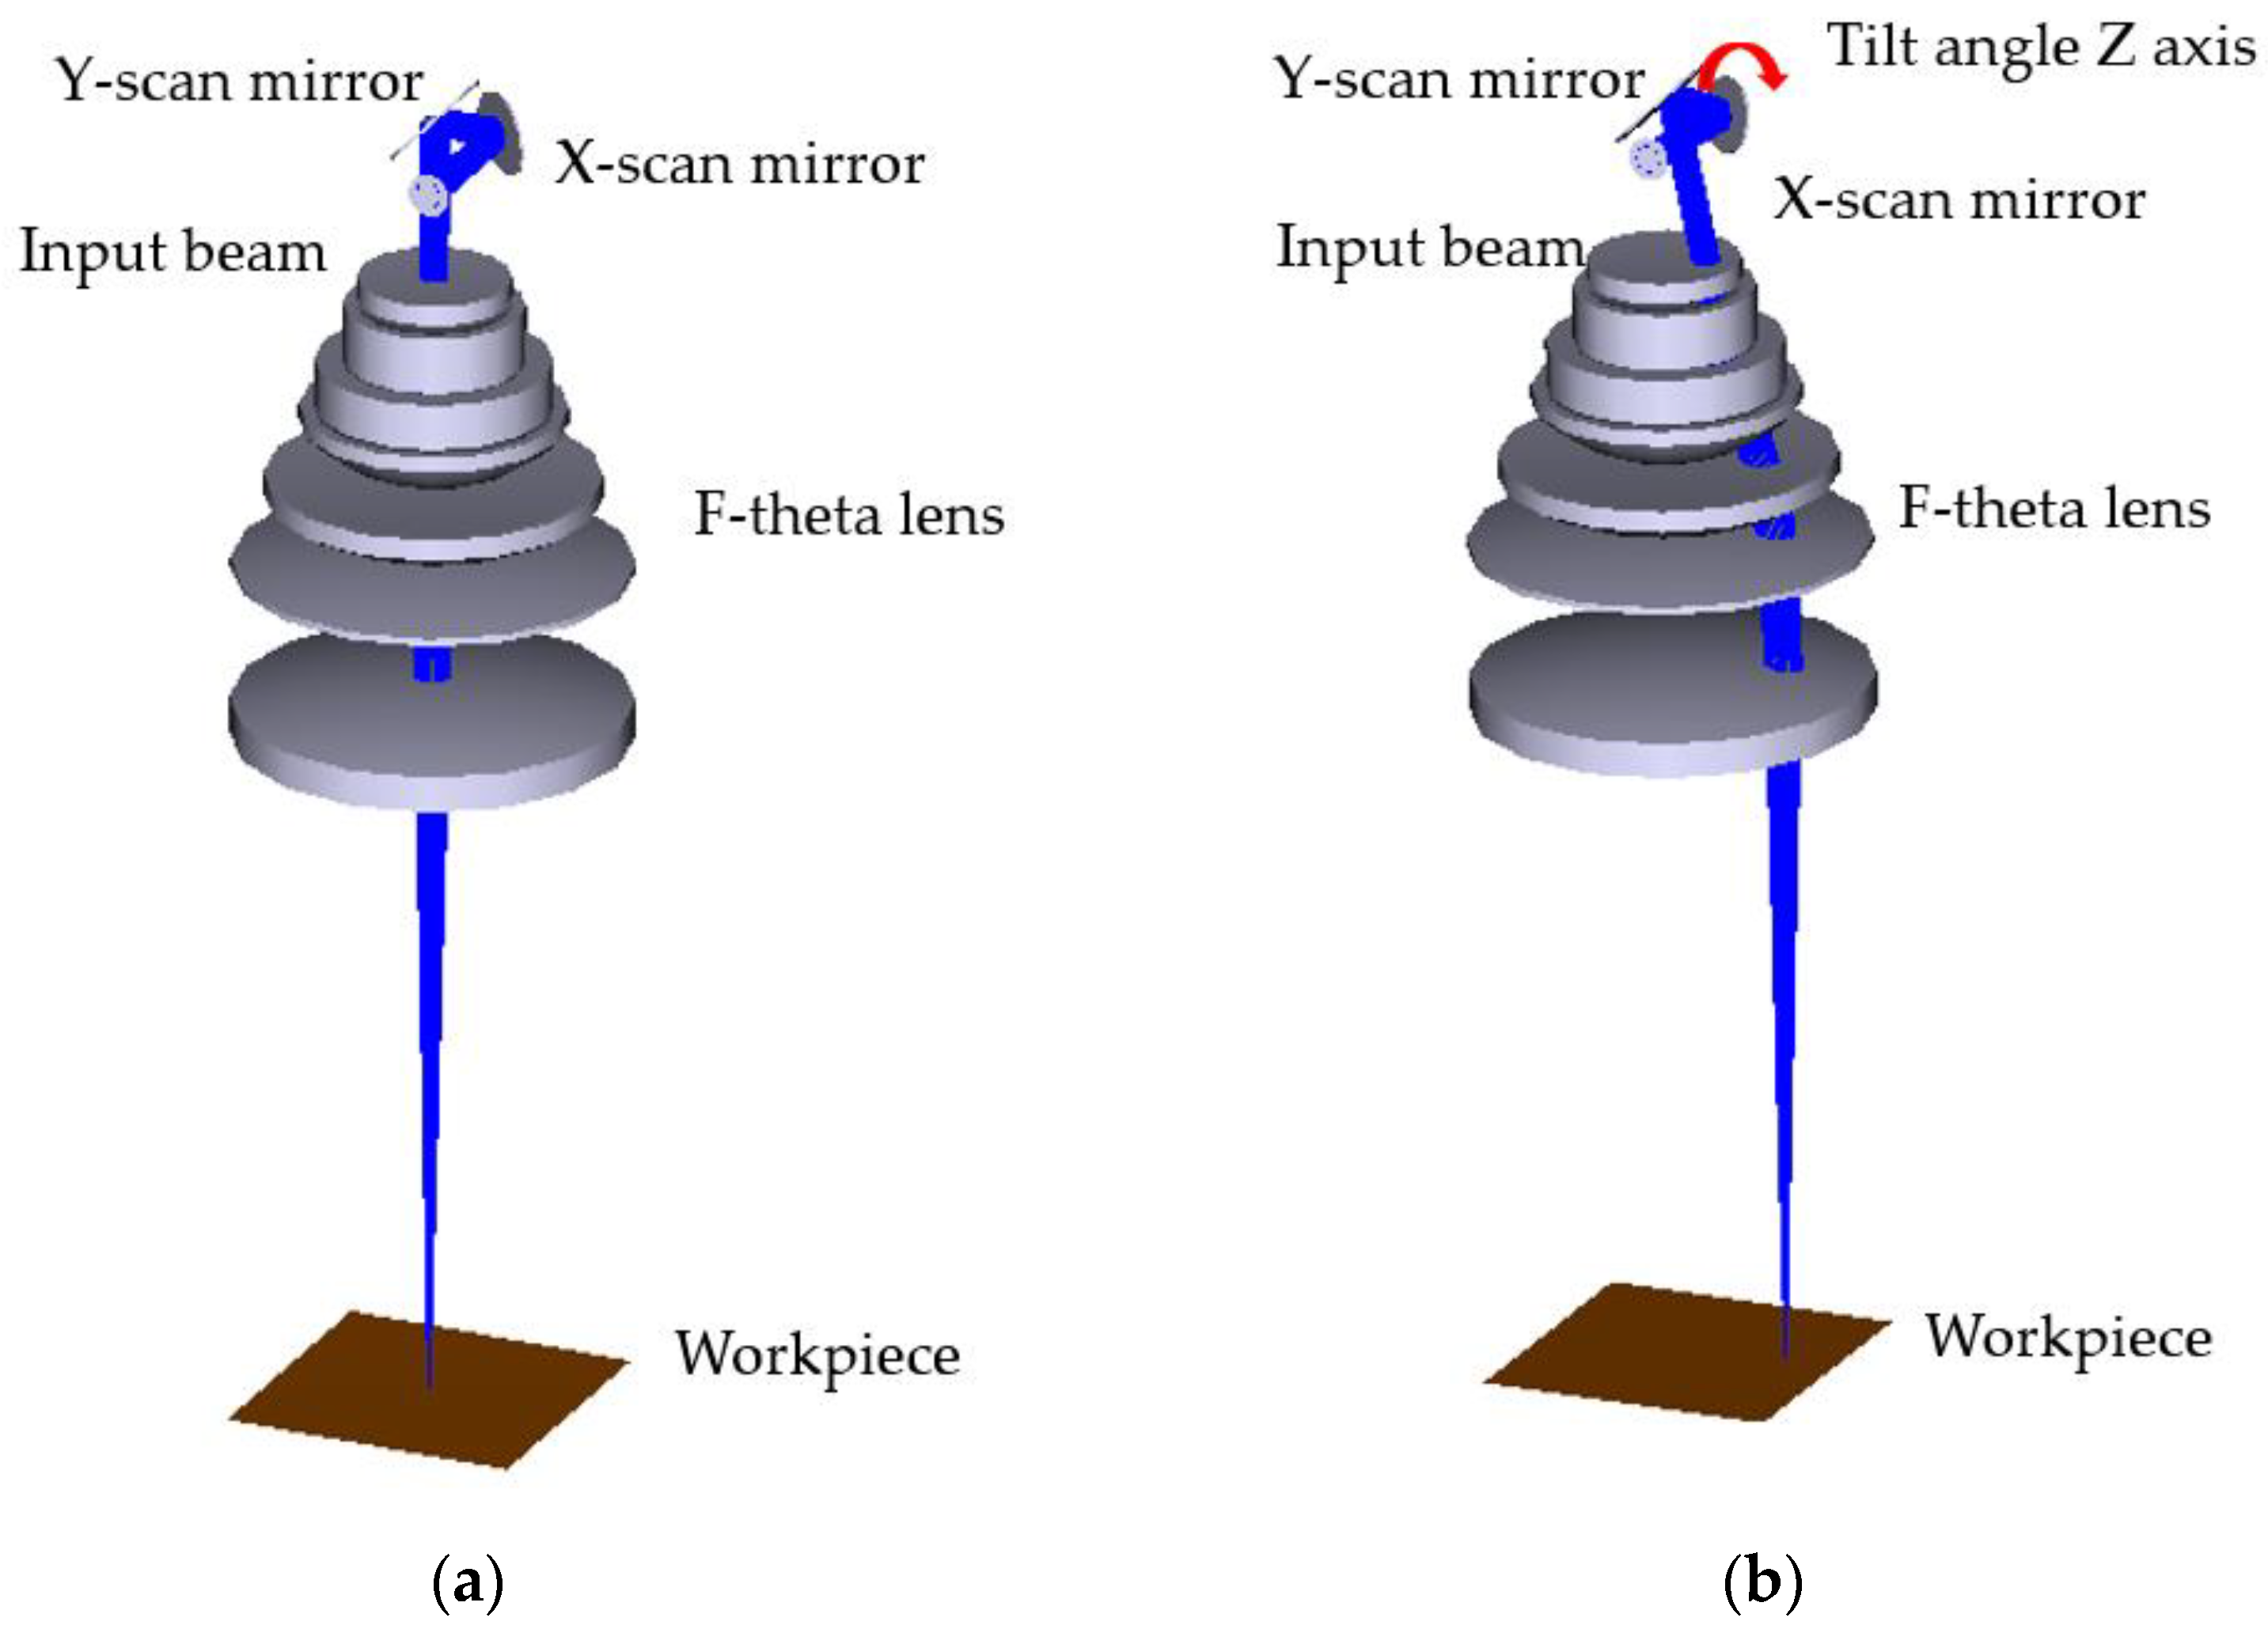 Advanced laser scanning for highly-efficient ablation and ultrafast surface  structuring: experiment and model